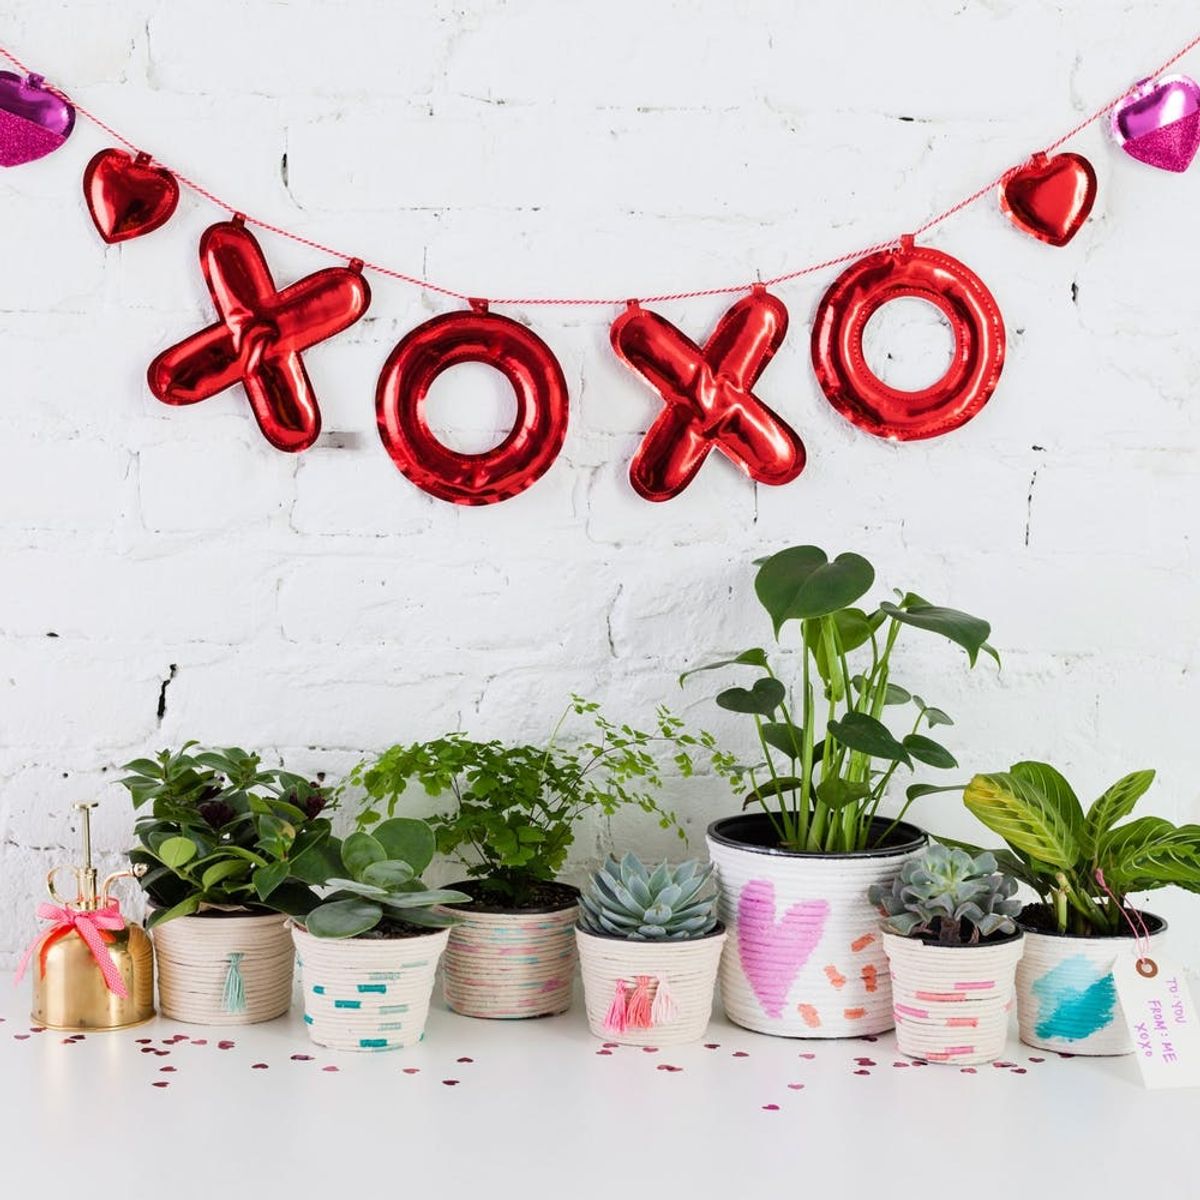 Mix These DIY Techniques to Make the Cutest Living Valentine’s Day Gift